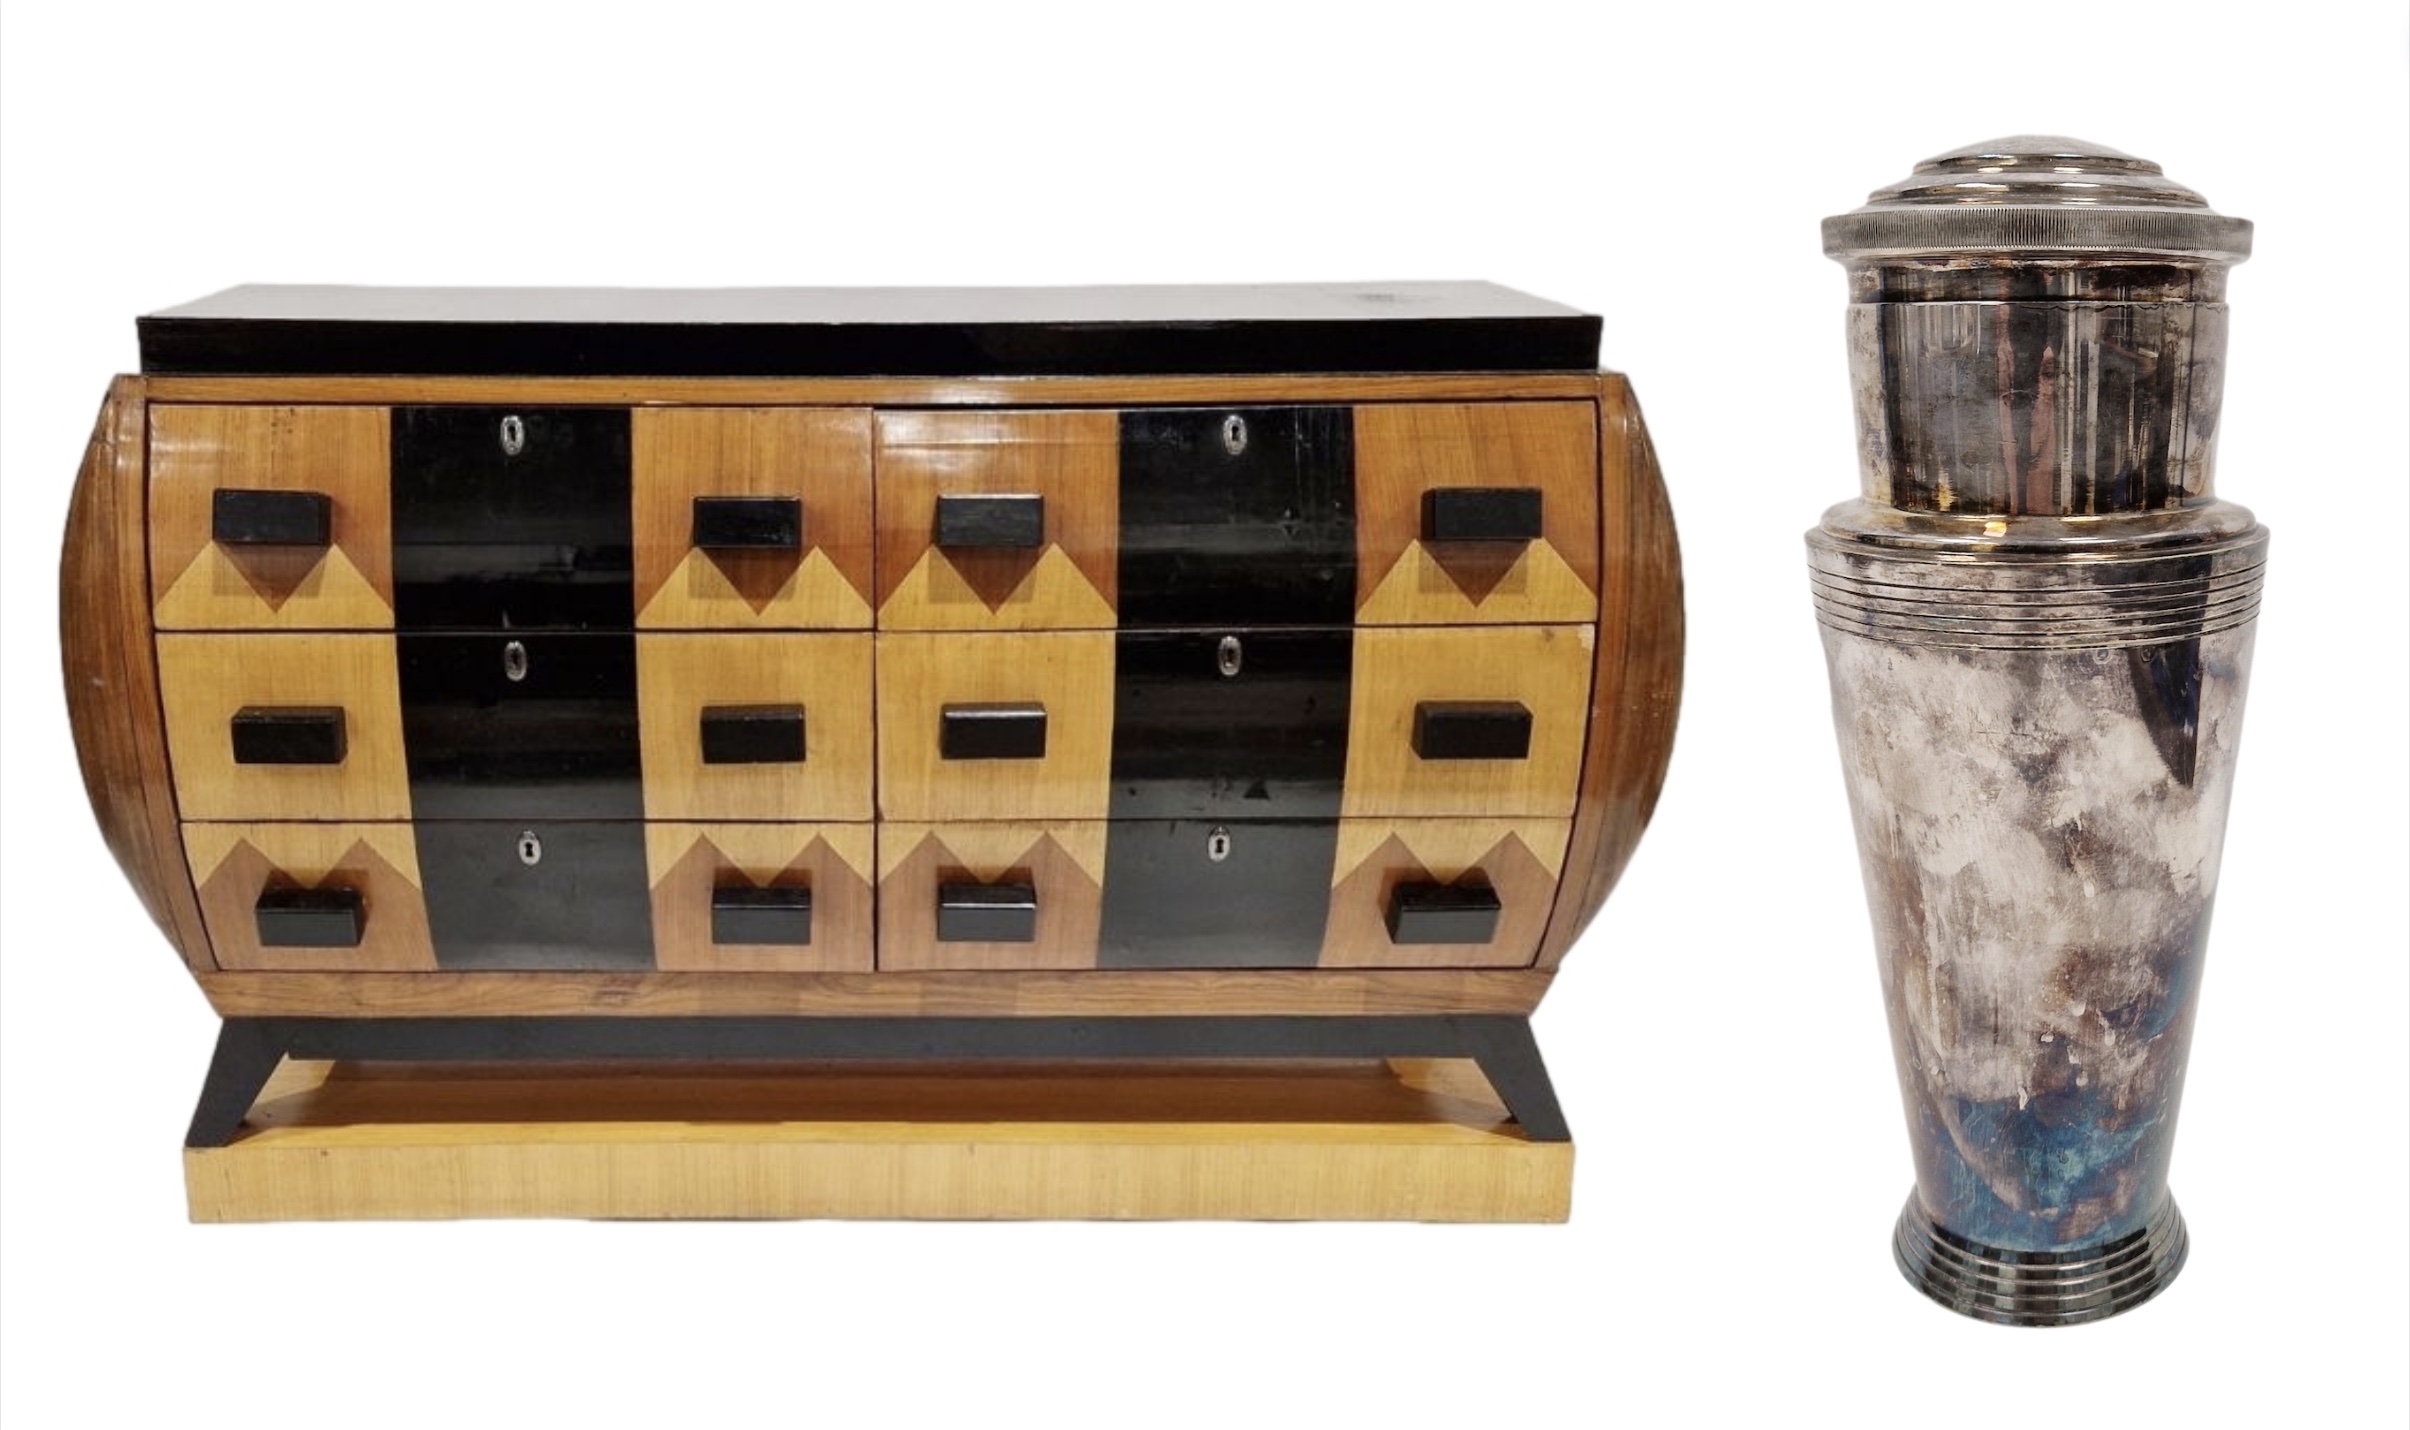 Bidders thirst for Art Deco cocktail shaker – Antique Collecting